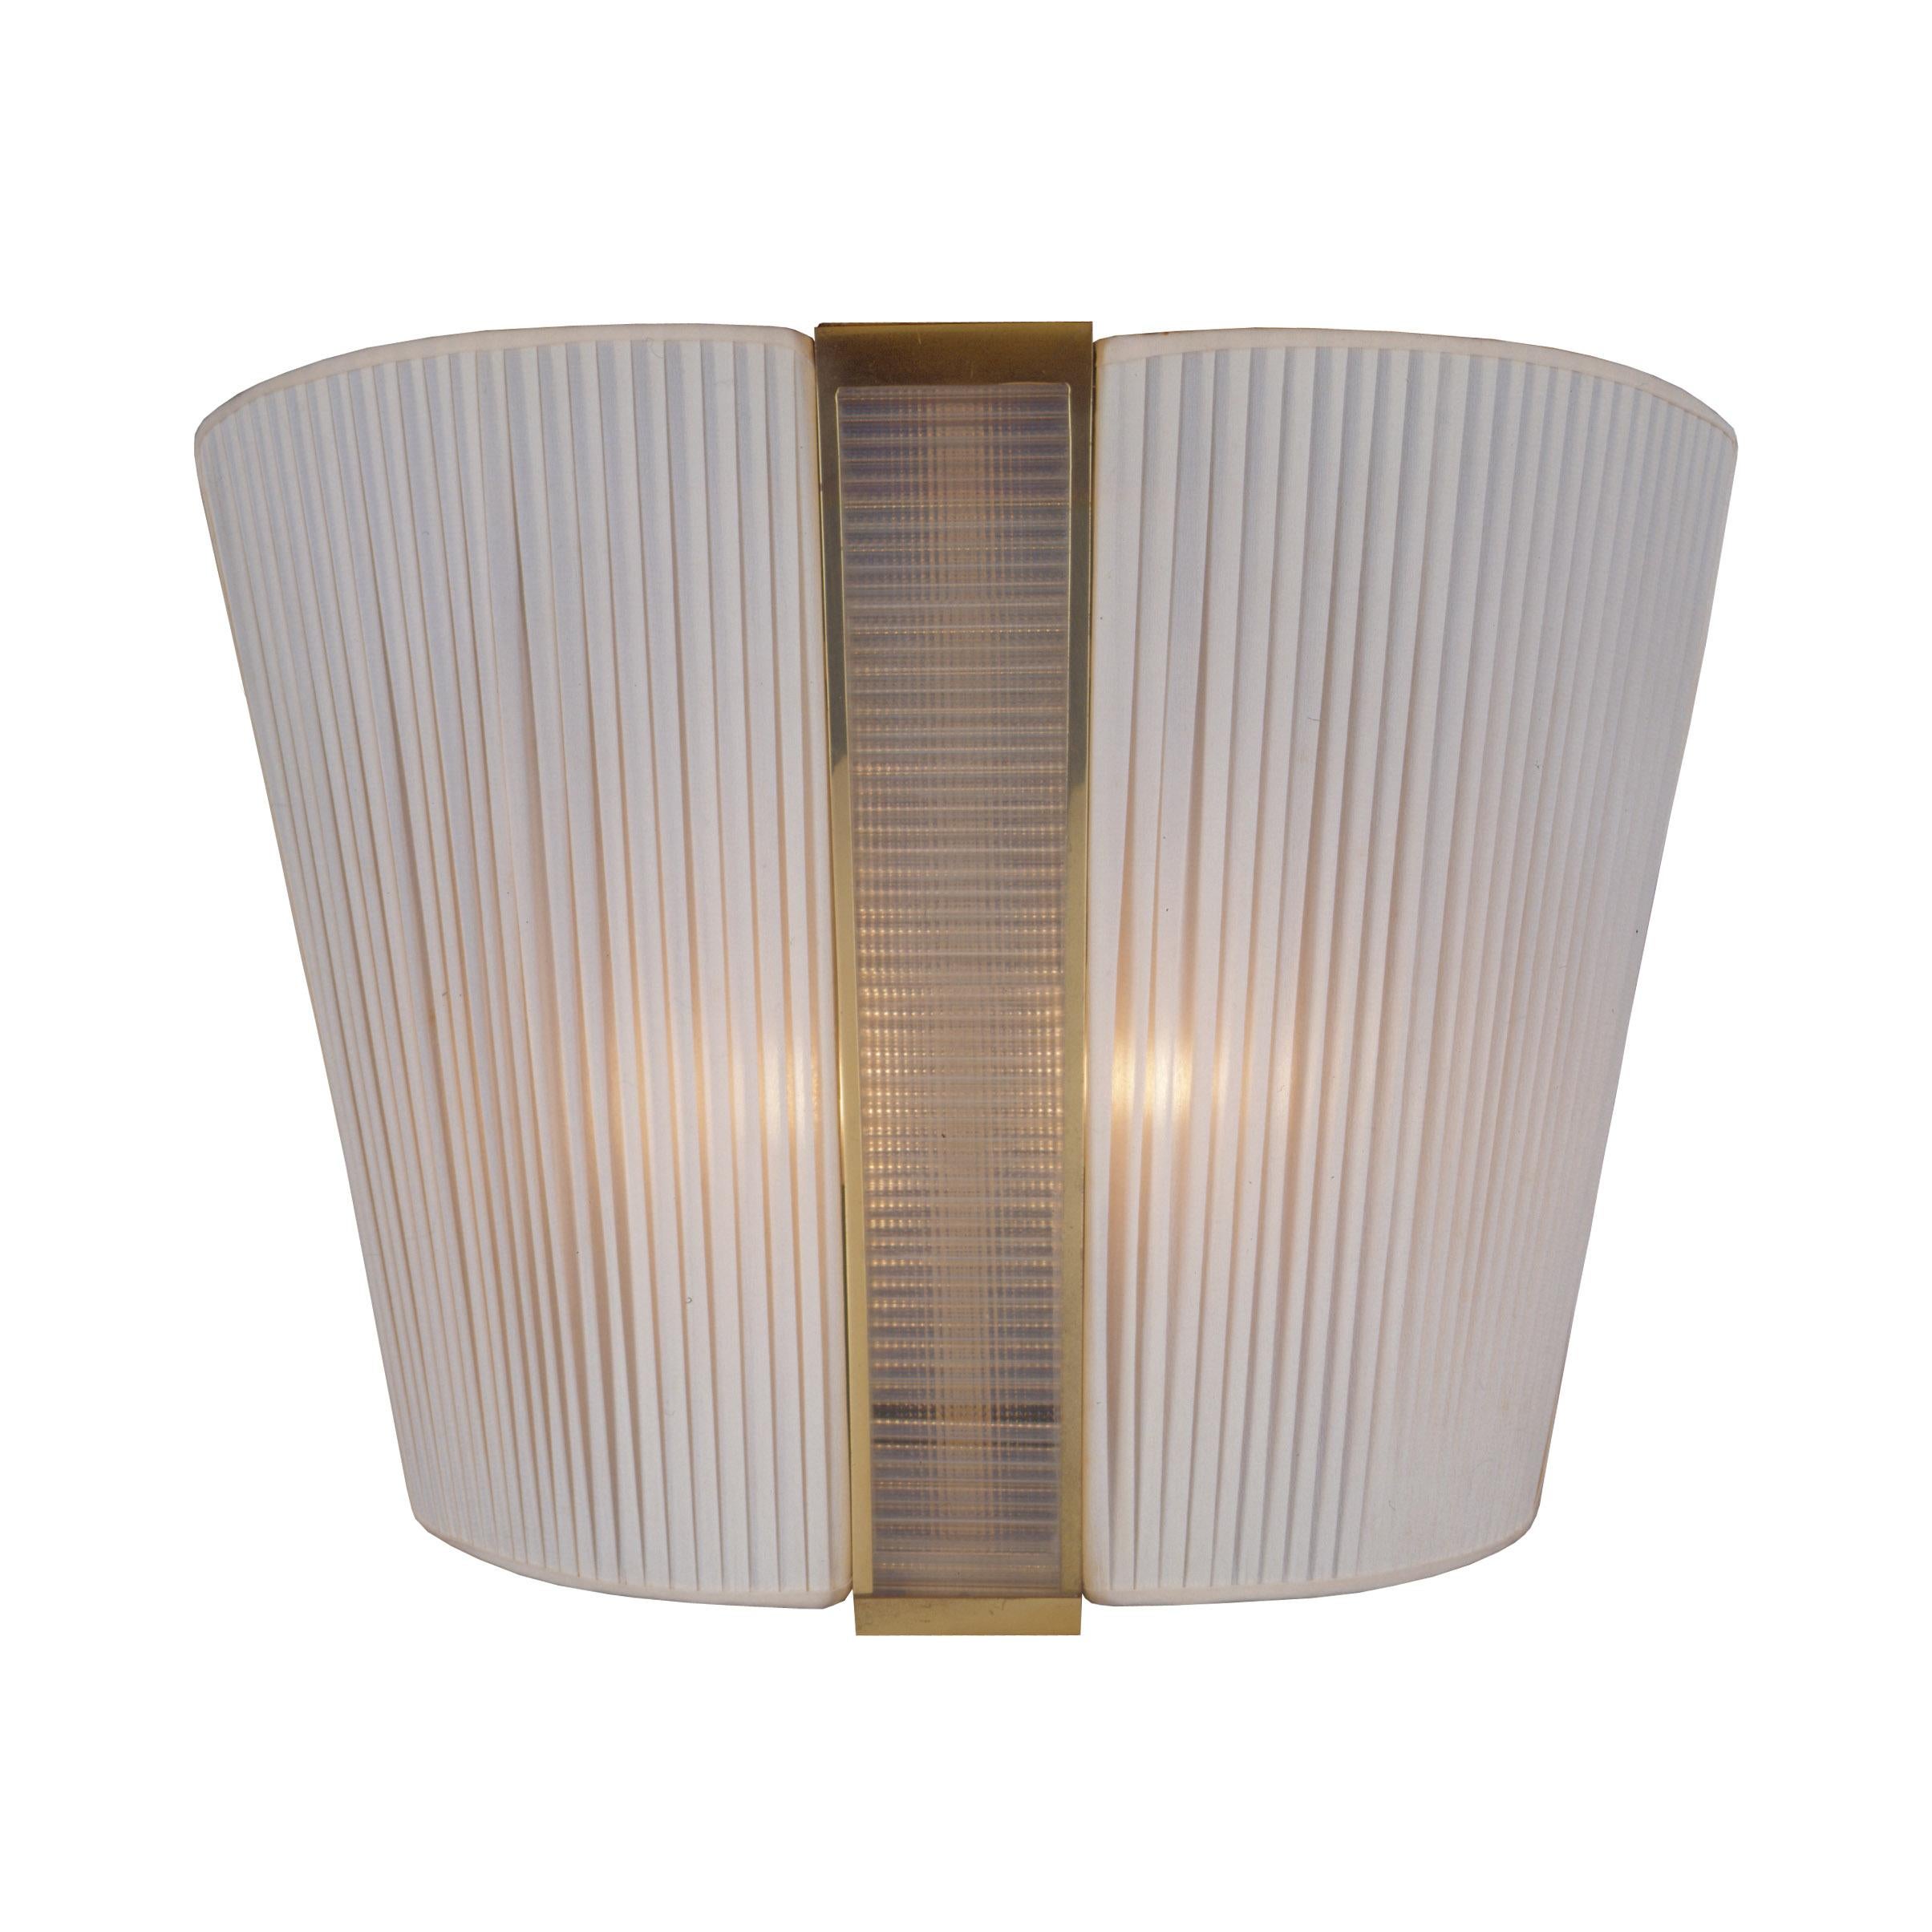 Very elegant wall-lamp with pleated fabric and textured acrylic-glass on the front. Different colors available!

Most components according to the UL regulations, with an additional charge we will UL-list and label our fixtures.